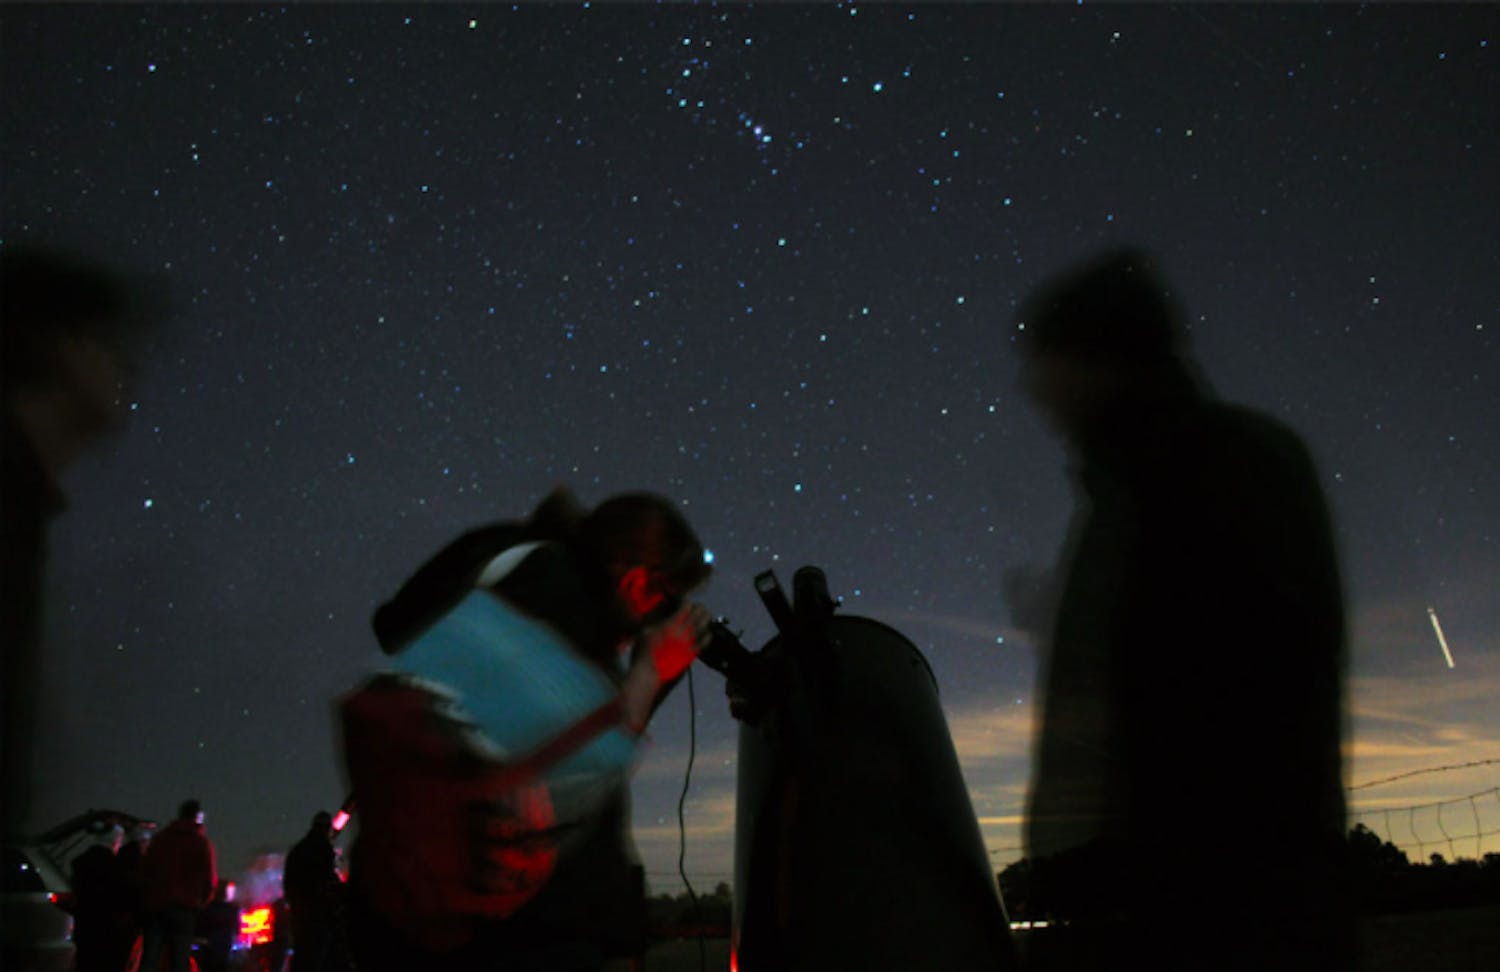 Attendees at Paynes Prarie stargazing event check out the night sky a few years ago in January 2015.